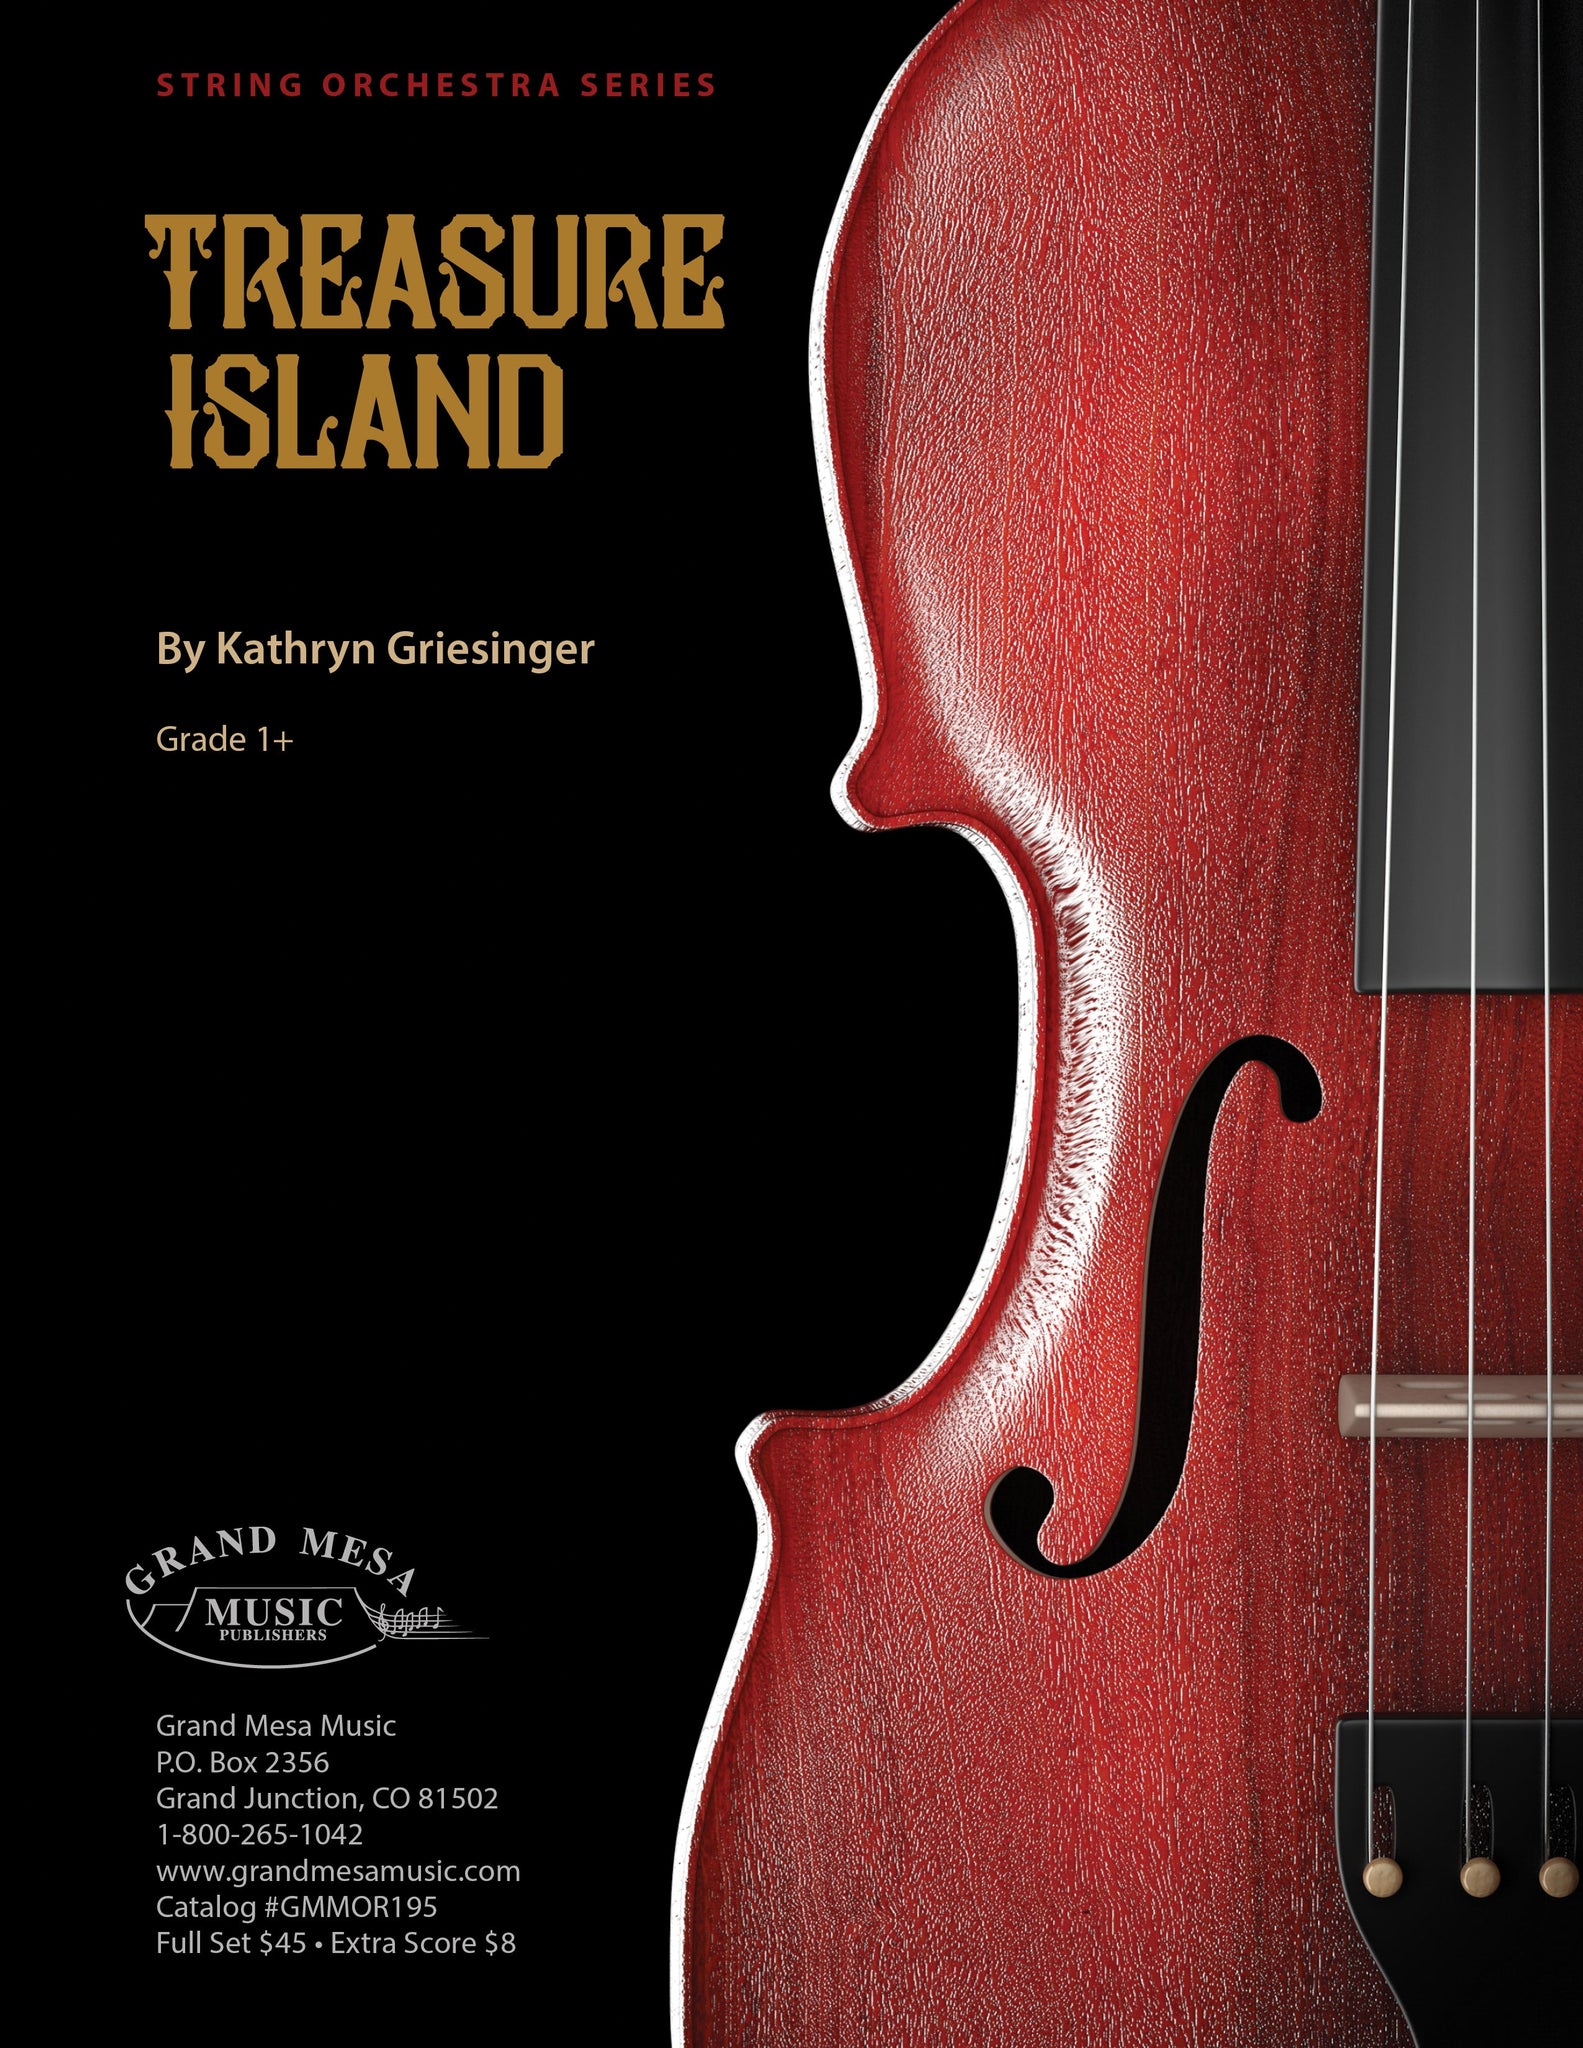 Strings sheet music cover of Treasure Island, composed by Kathryn Parrish (Griesinger).